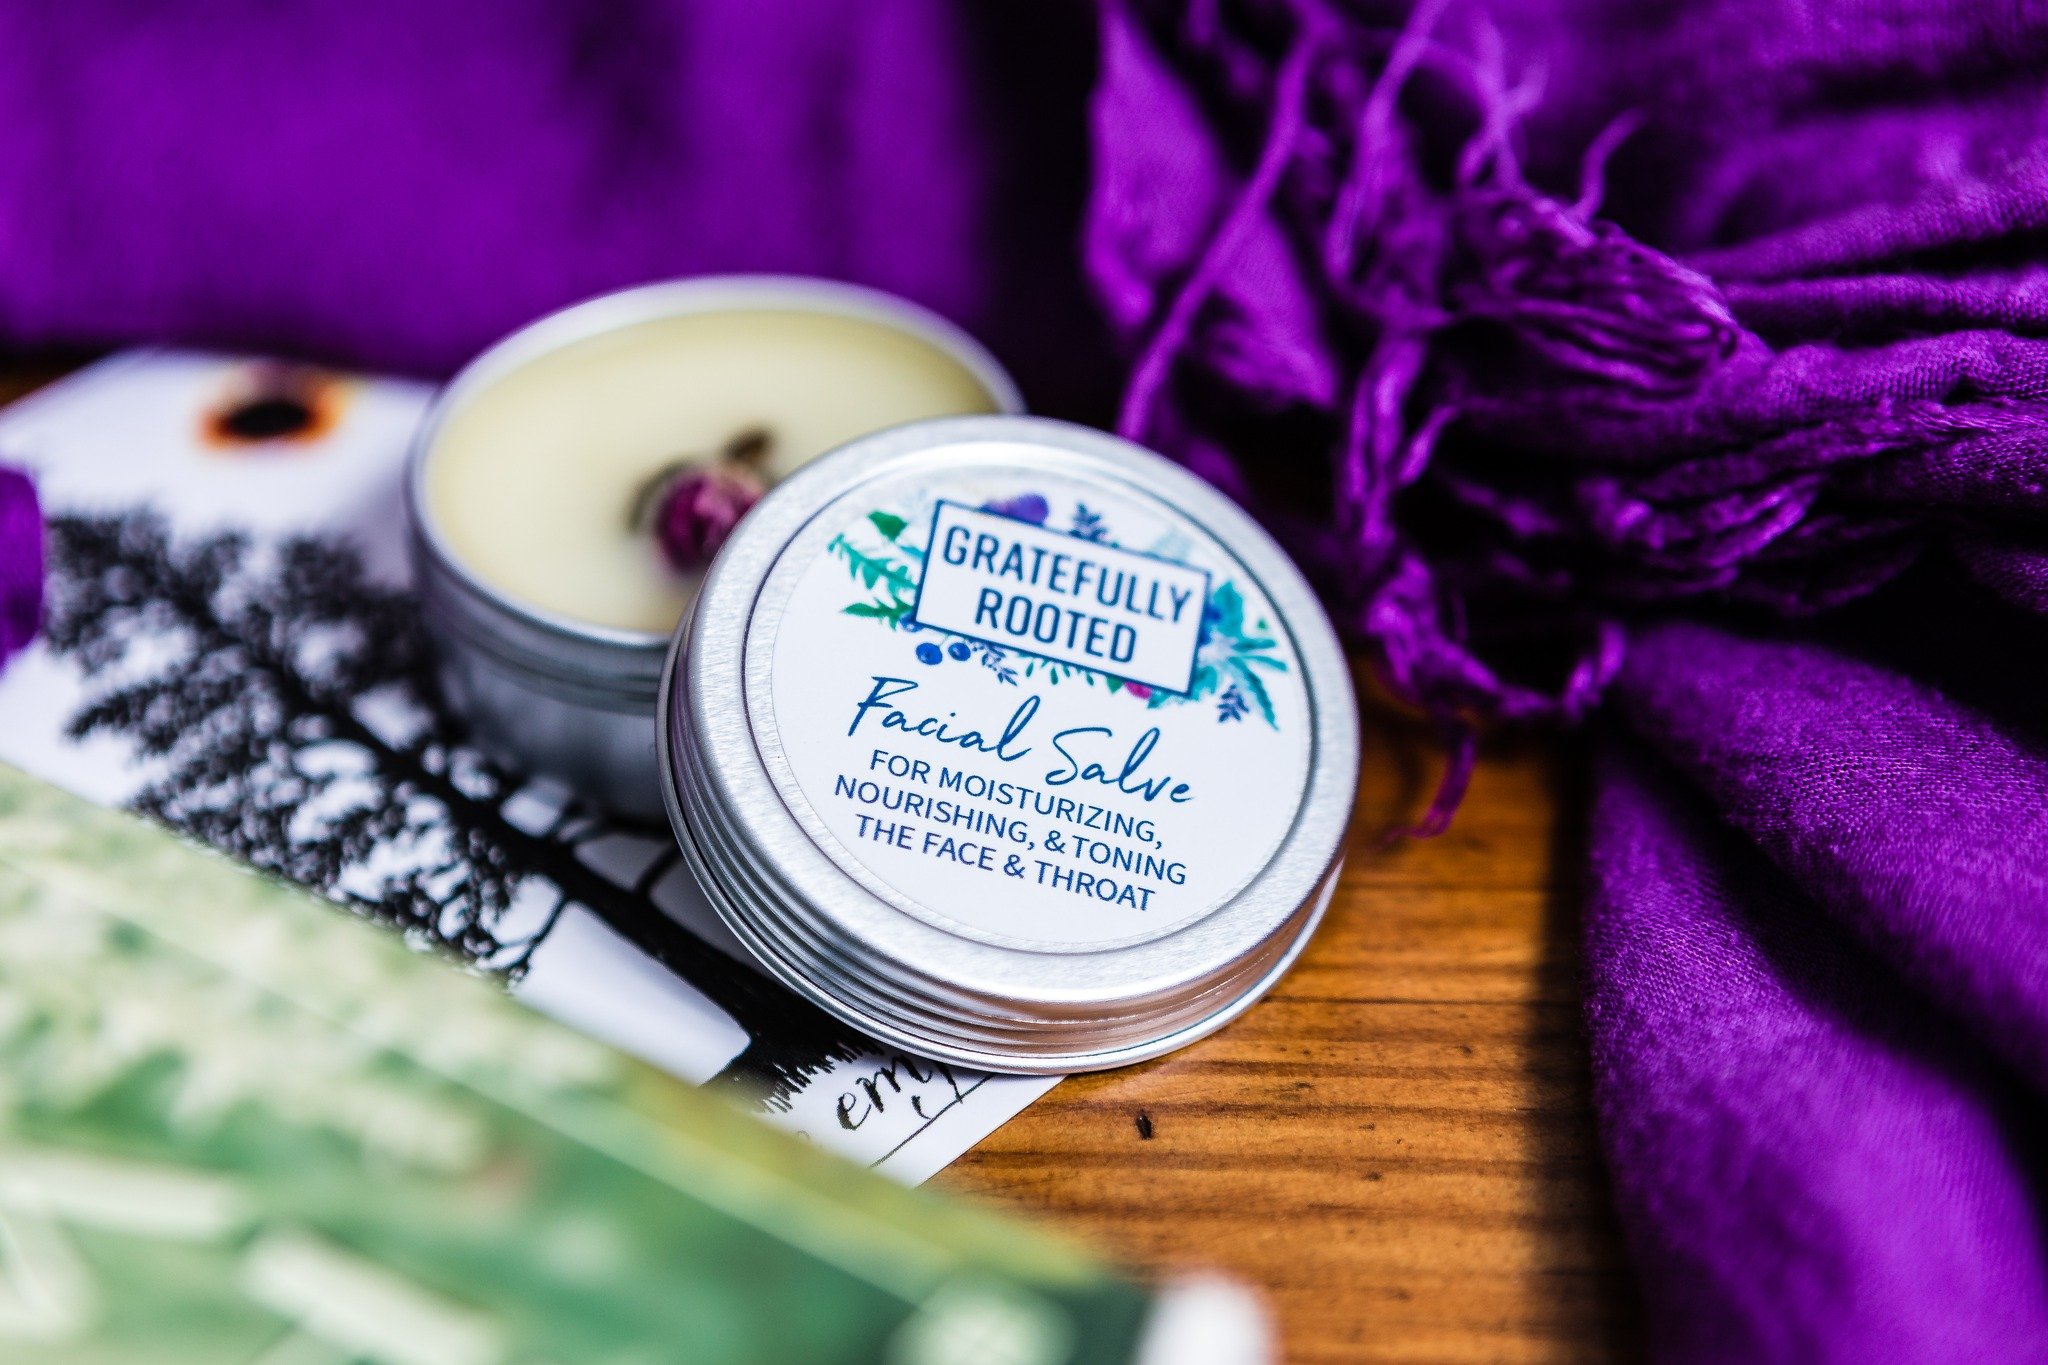 🌹Facial Salve🌹

Other oils &amp; teas I use on rotation &amp; whim, this is the one product I make that I use DAILY. You will be shocked what a little tin of delicious salve for your face can do!

This salve calls on the wild topical healing and no